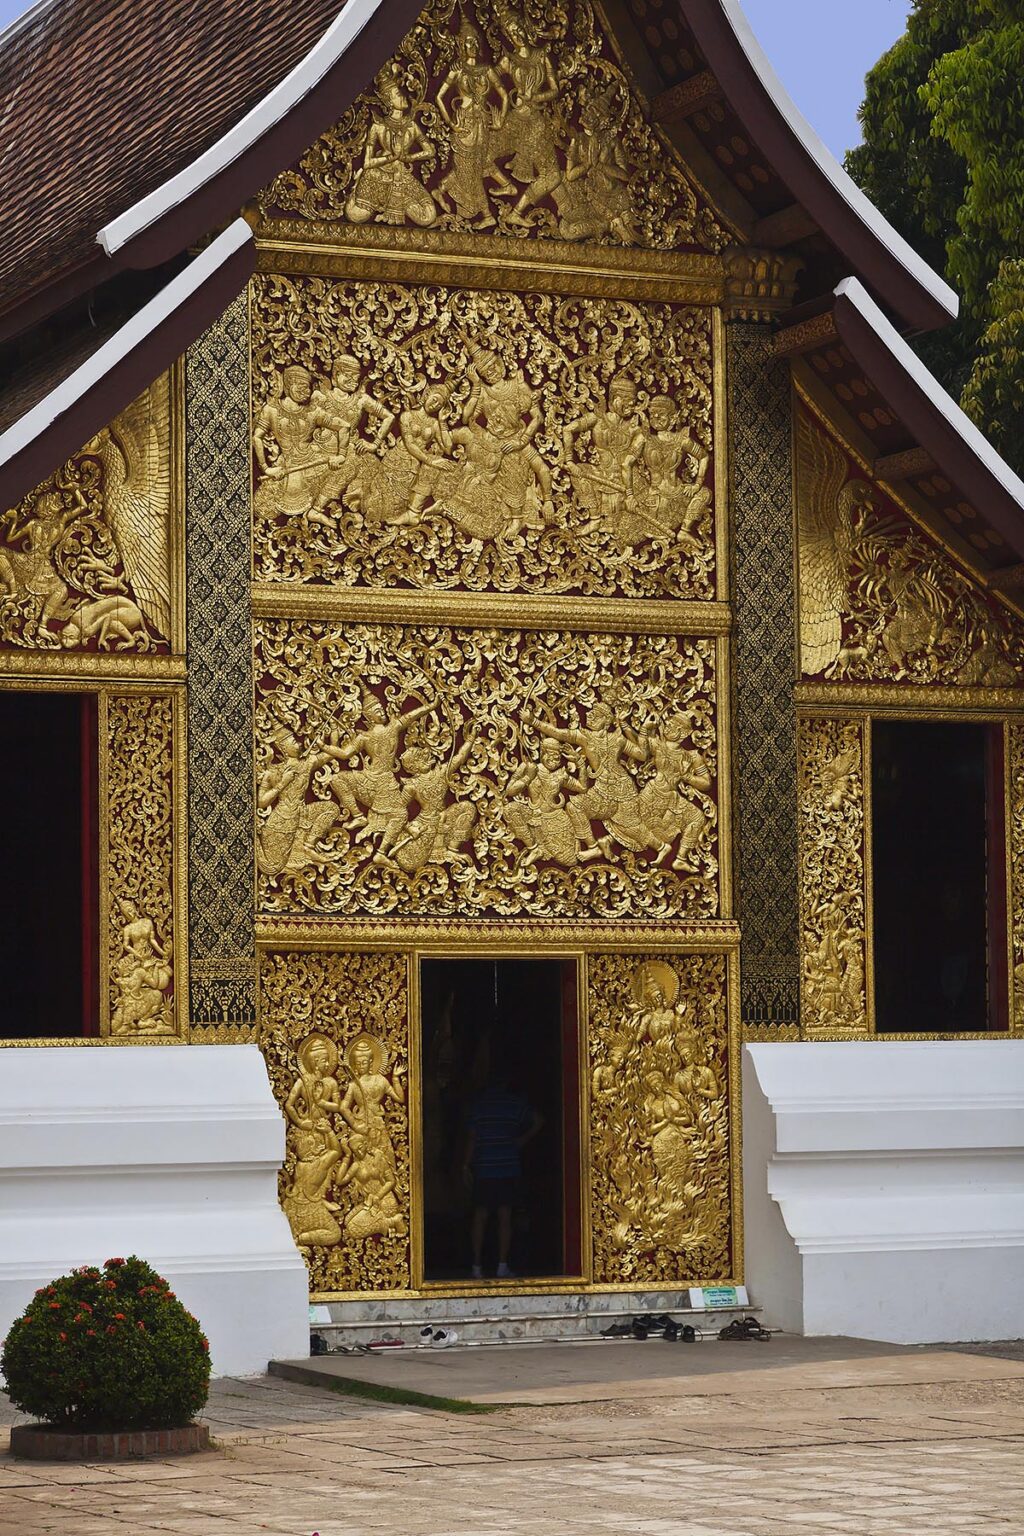 Gilded BAS RELIEF of Lao history at WAT XIENG THONG (Temple of the Golden City), built in 1560 - LUANG PRABANG, LAOS